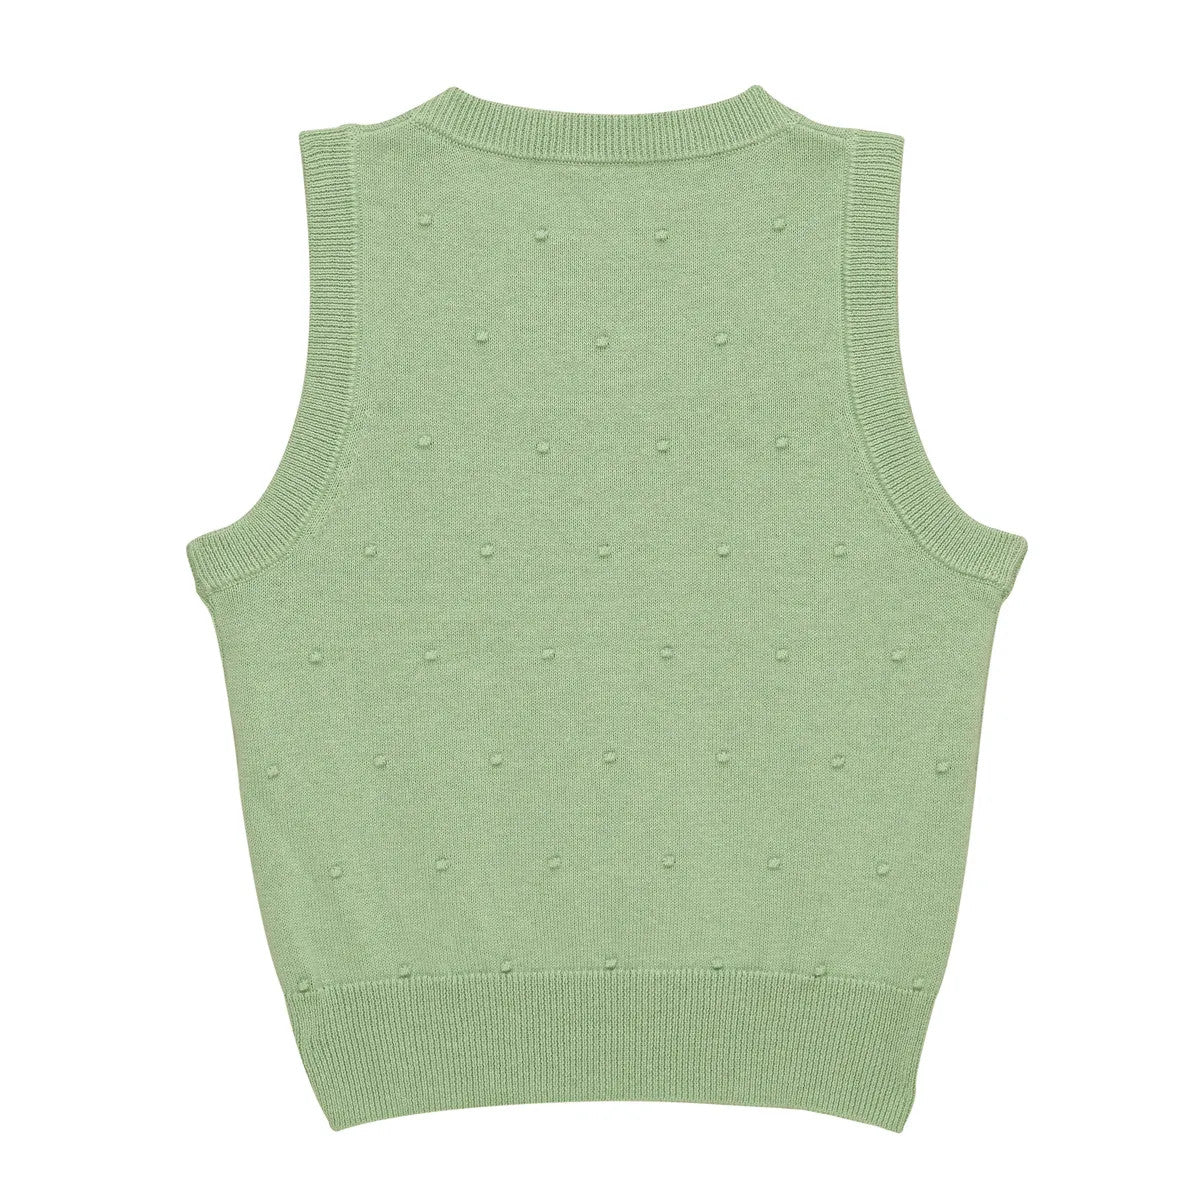 Little Hedonist green organic cotton sleeveless knitted sweater. The popcorn knit gives the style a little extra that dresses your child up for any occasion! Wear over a top or on its own. We use recycled materials.